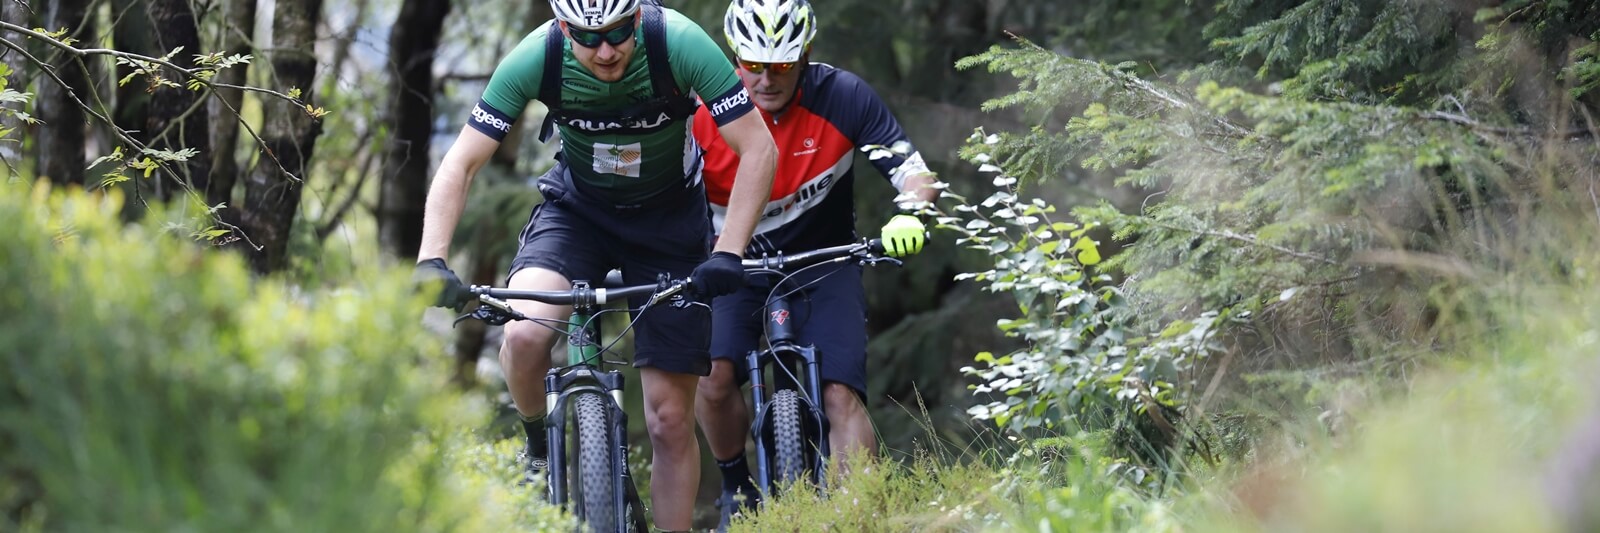 Mtb Harz Guiding Fritz Geers